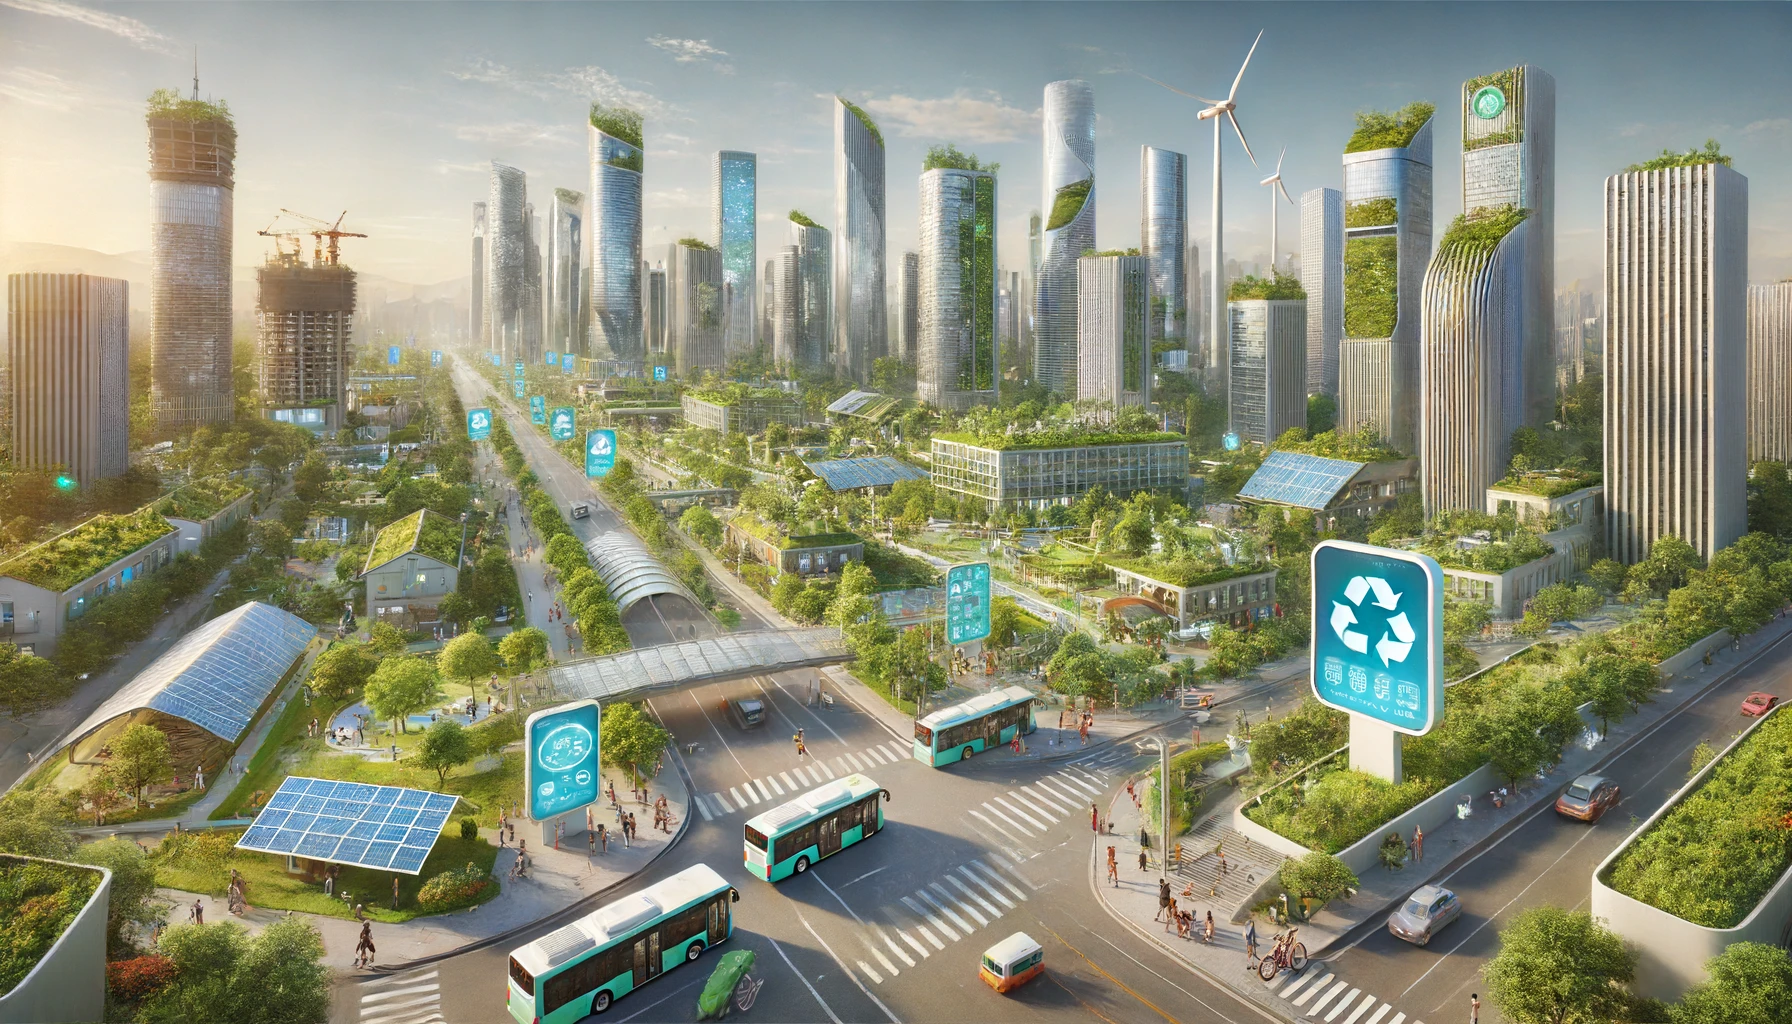 How Smart City Construction Effects Environmental Pollution: Study of China's Pilot Policies